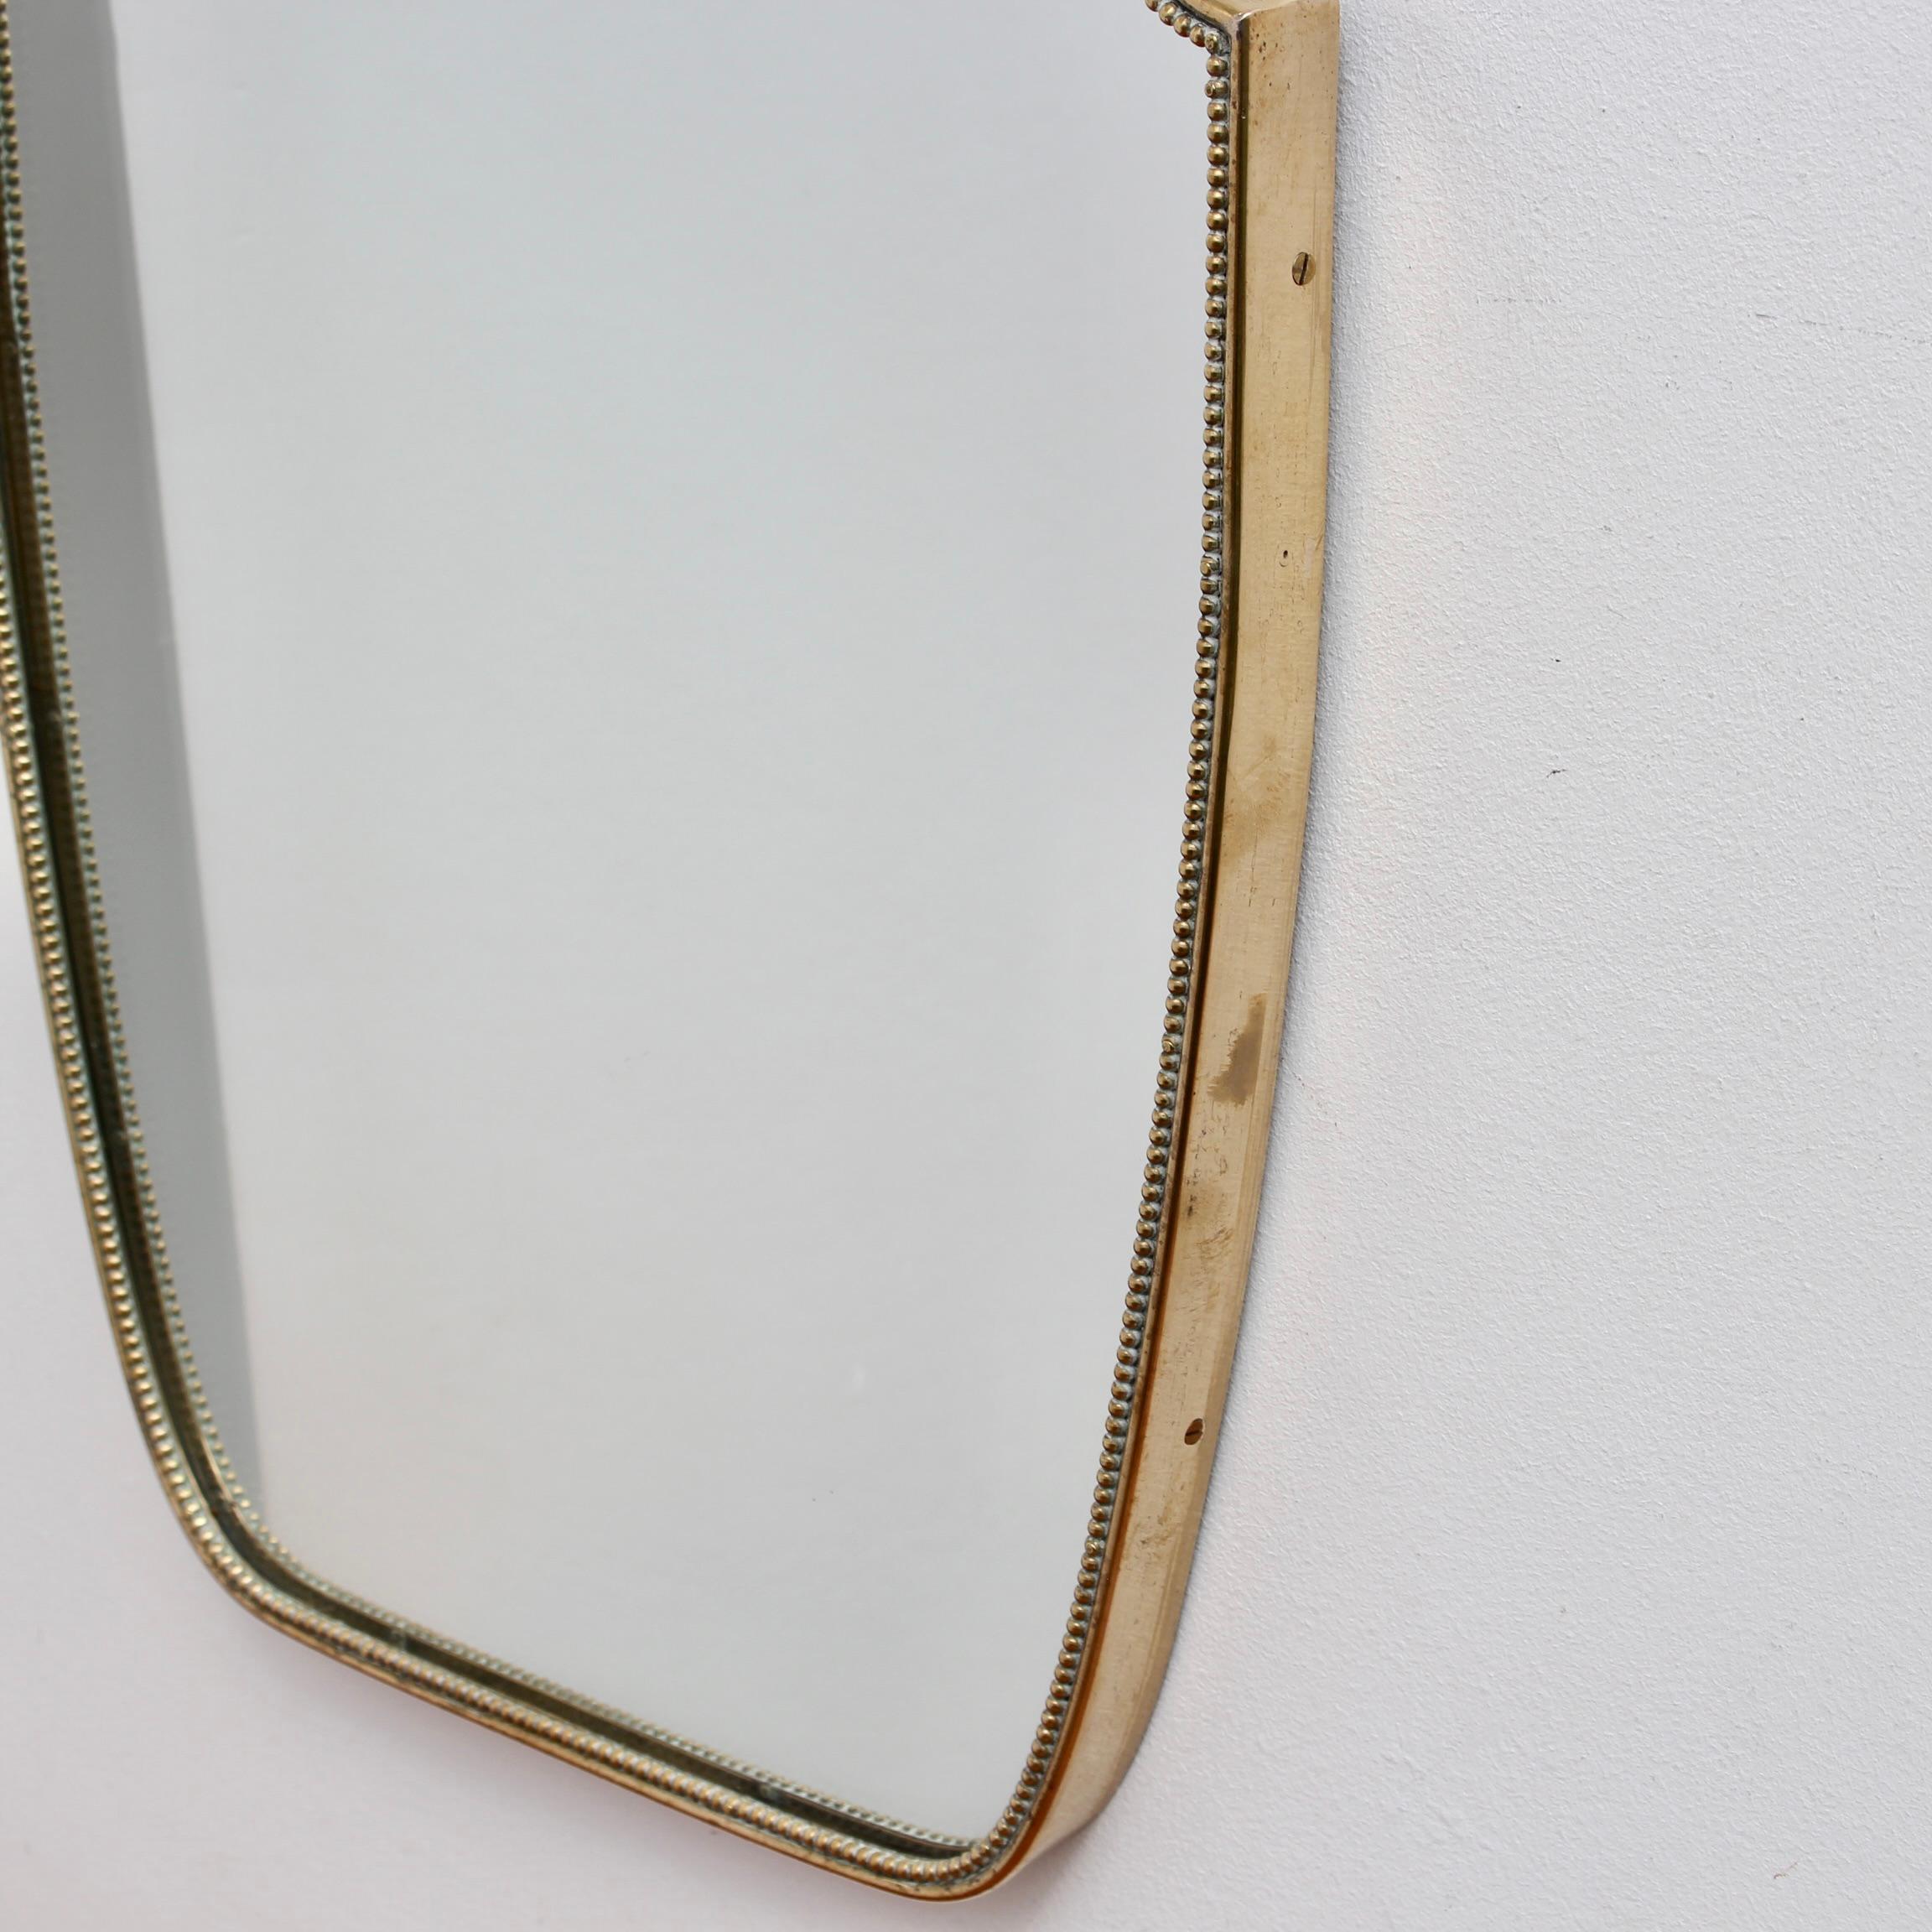 Vintage Italian Wall Mirror with Brass Frame and Beading, 'circa 1950s' 4